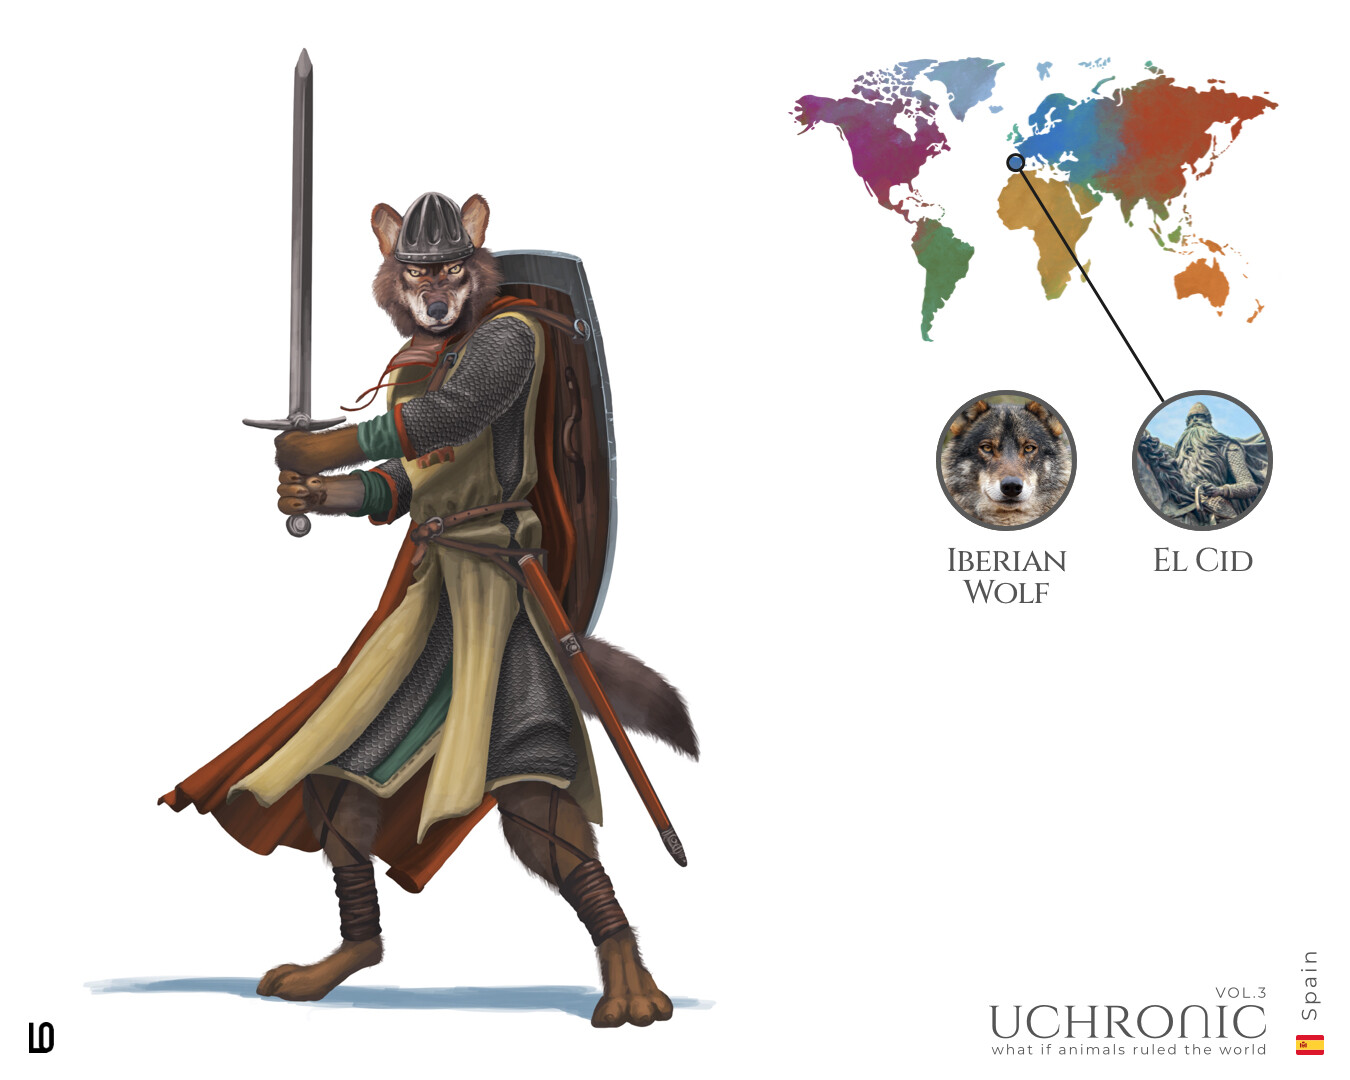 From Spain, El Cid, warrior and leader of his troops, as another animal that hunt in group… the Iberian wolf.